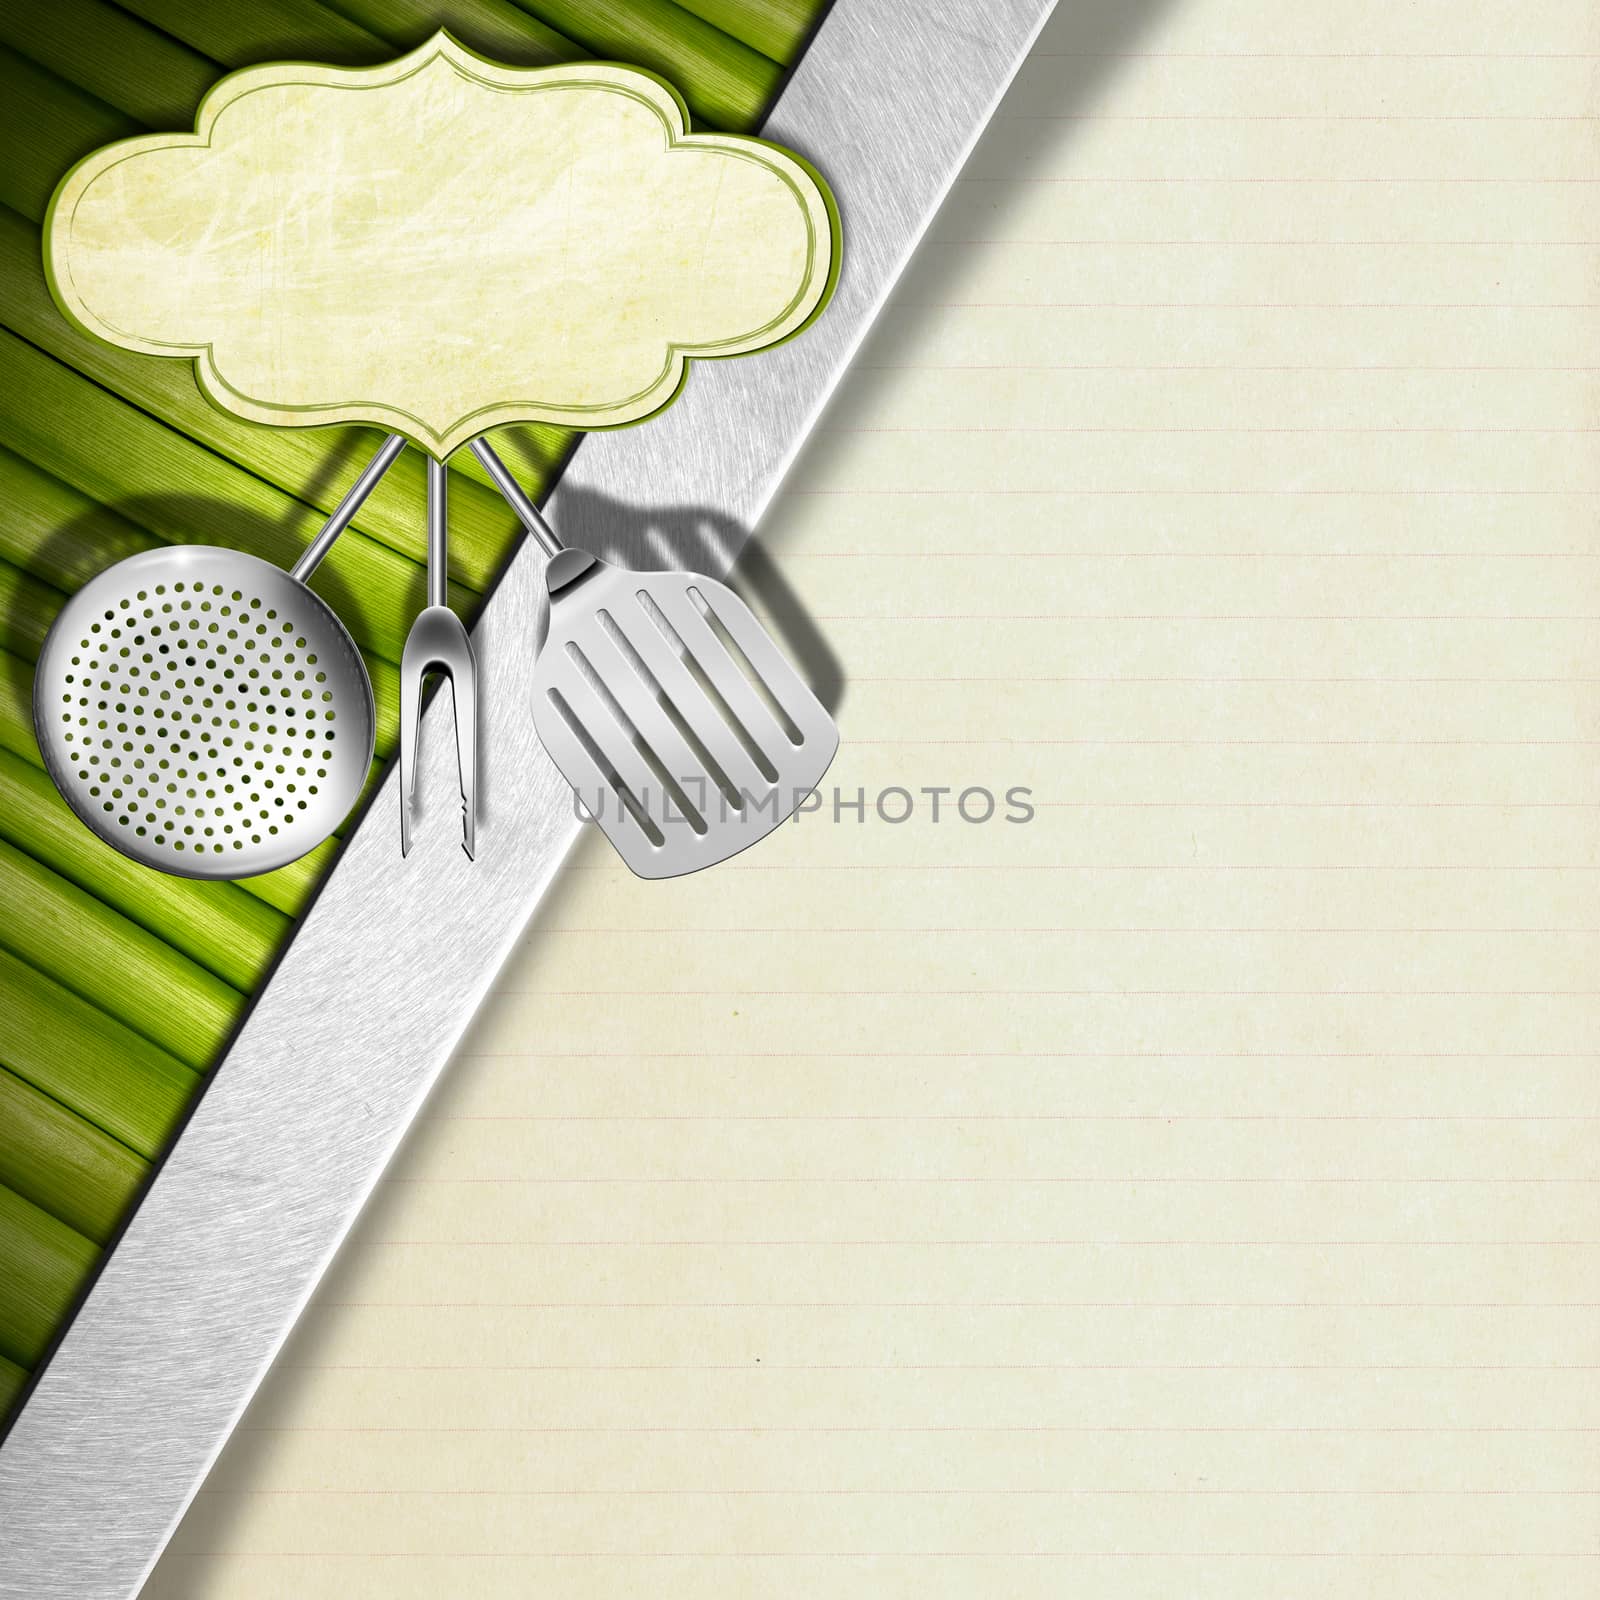 Background with green vegetables, kitchen utensils and empty label, diagonal metallic stripe and paper sheet, template for a Vegan Menu
